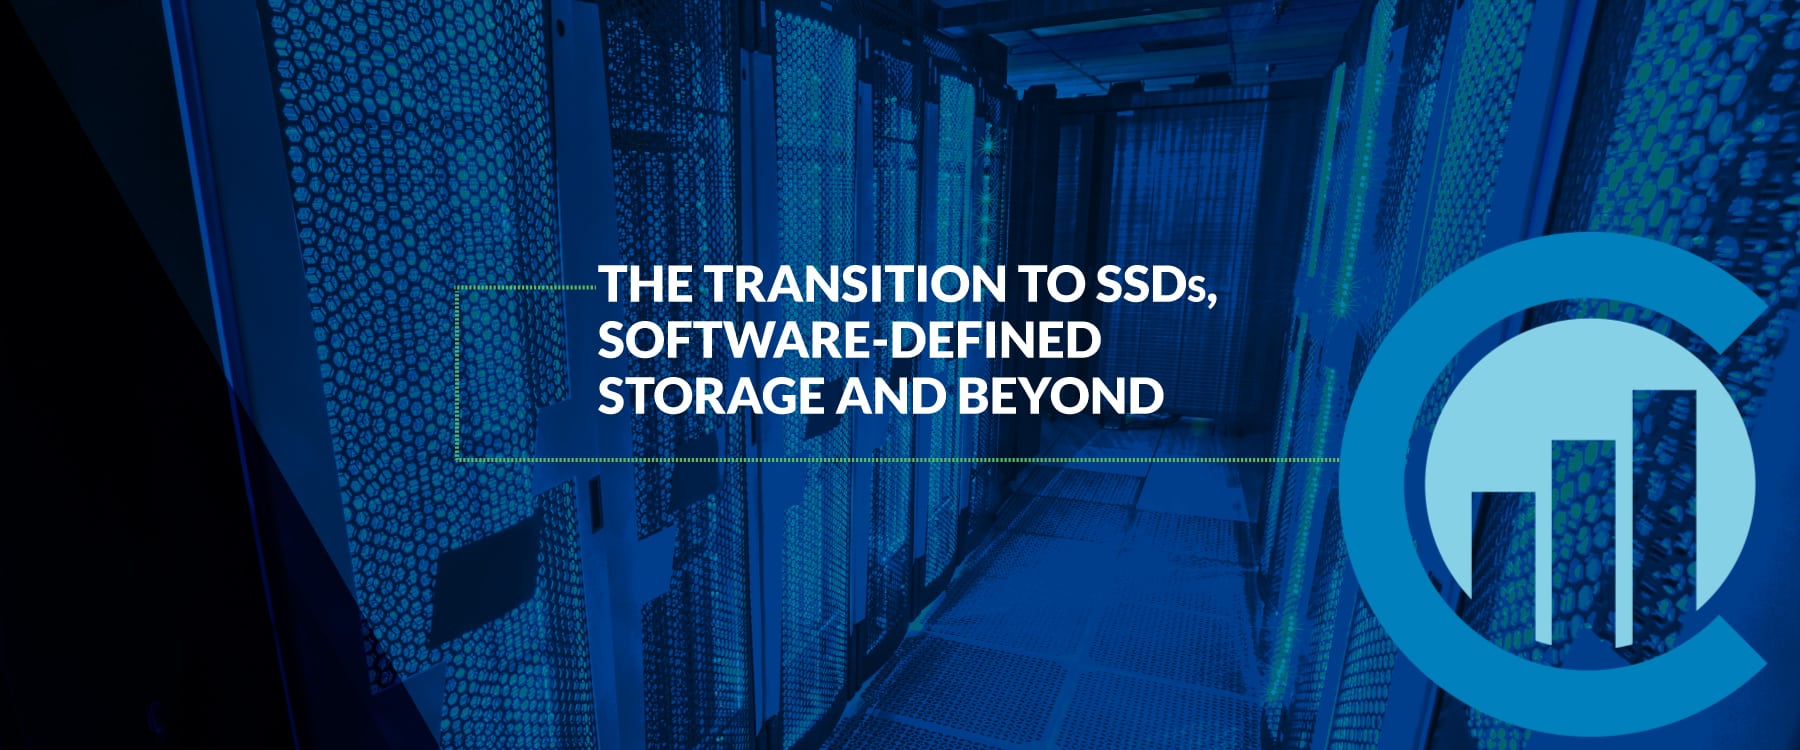 CloudScale365 Takes the Lead: A Transition to SSDs, Software-Defined Storage, and Beyond